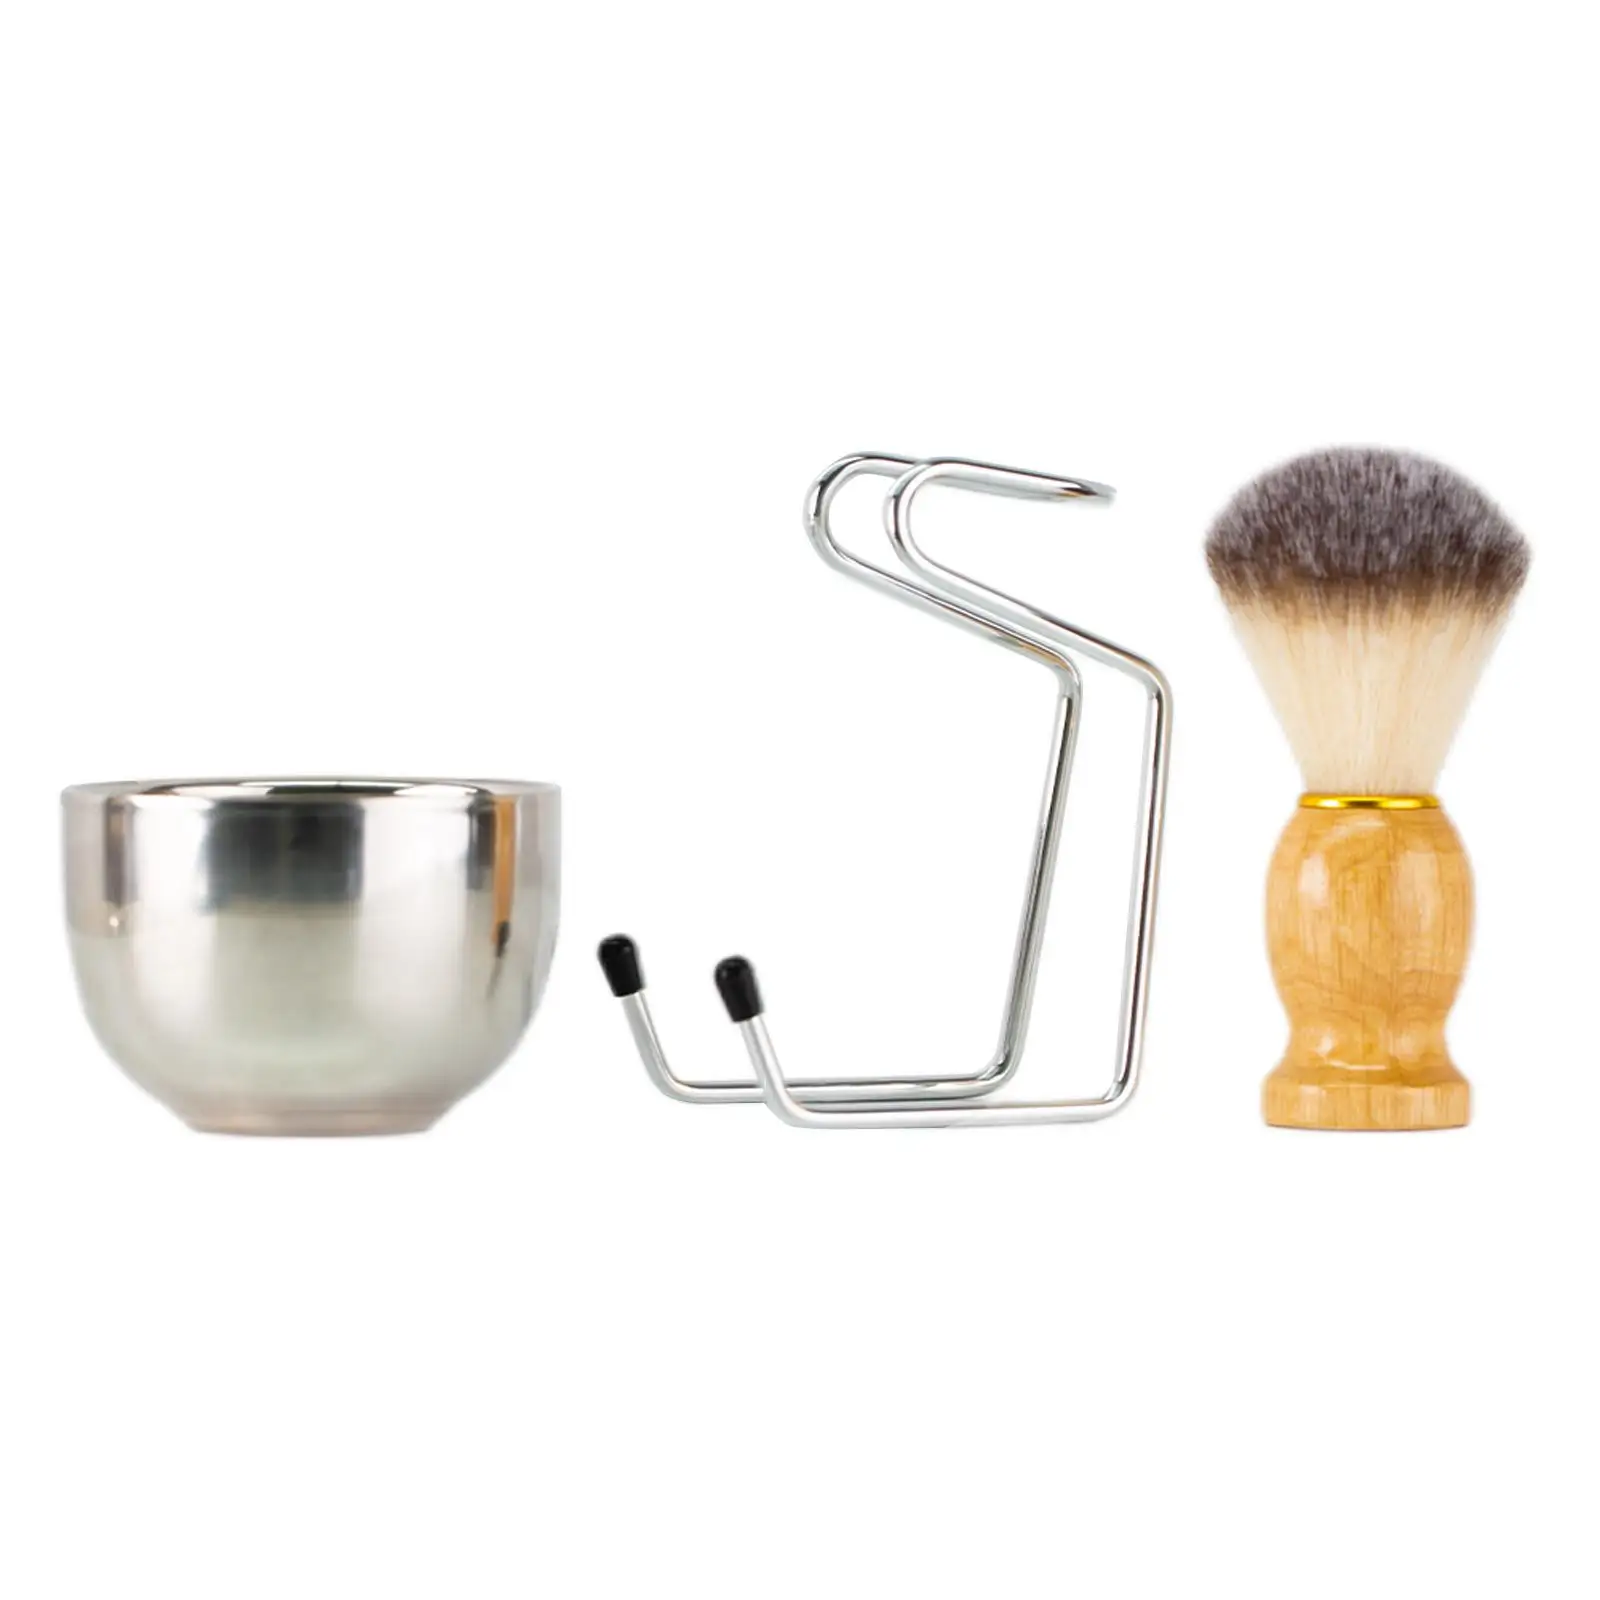 3 in 1 Wet Shaving Kit with Shave Brush Stand Mug, Hair Shaving Brushes Wood Handle Easy Carry Professional Durable Gift Premium